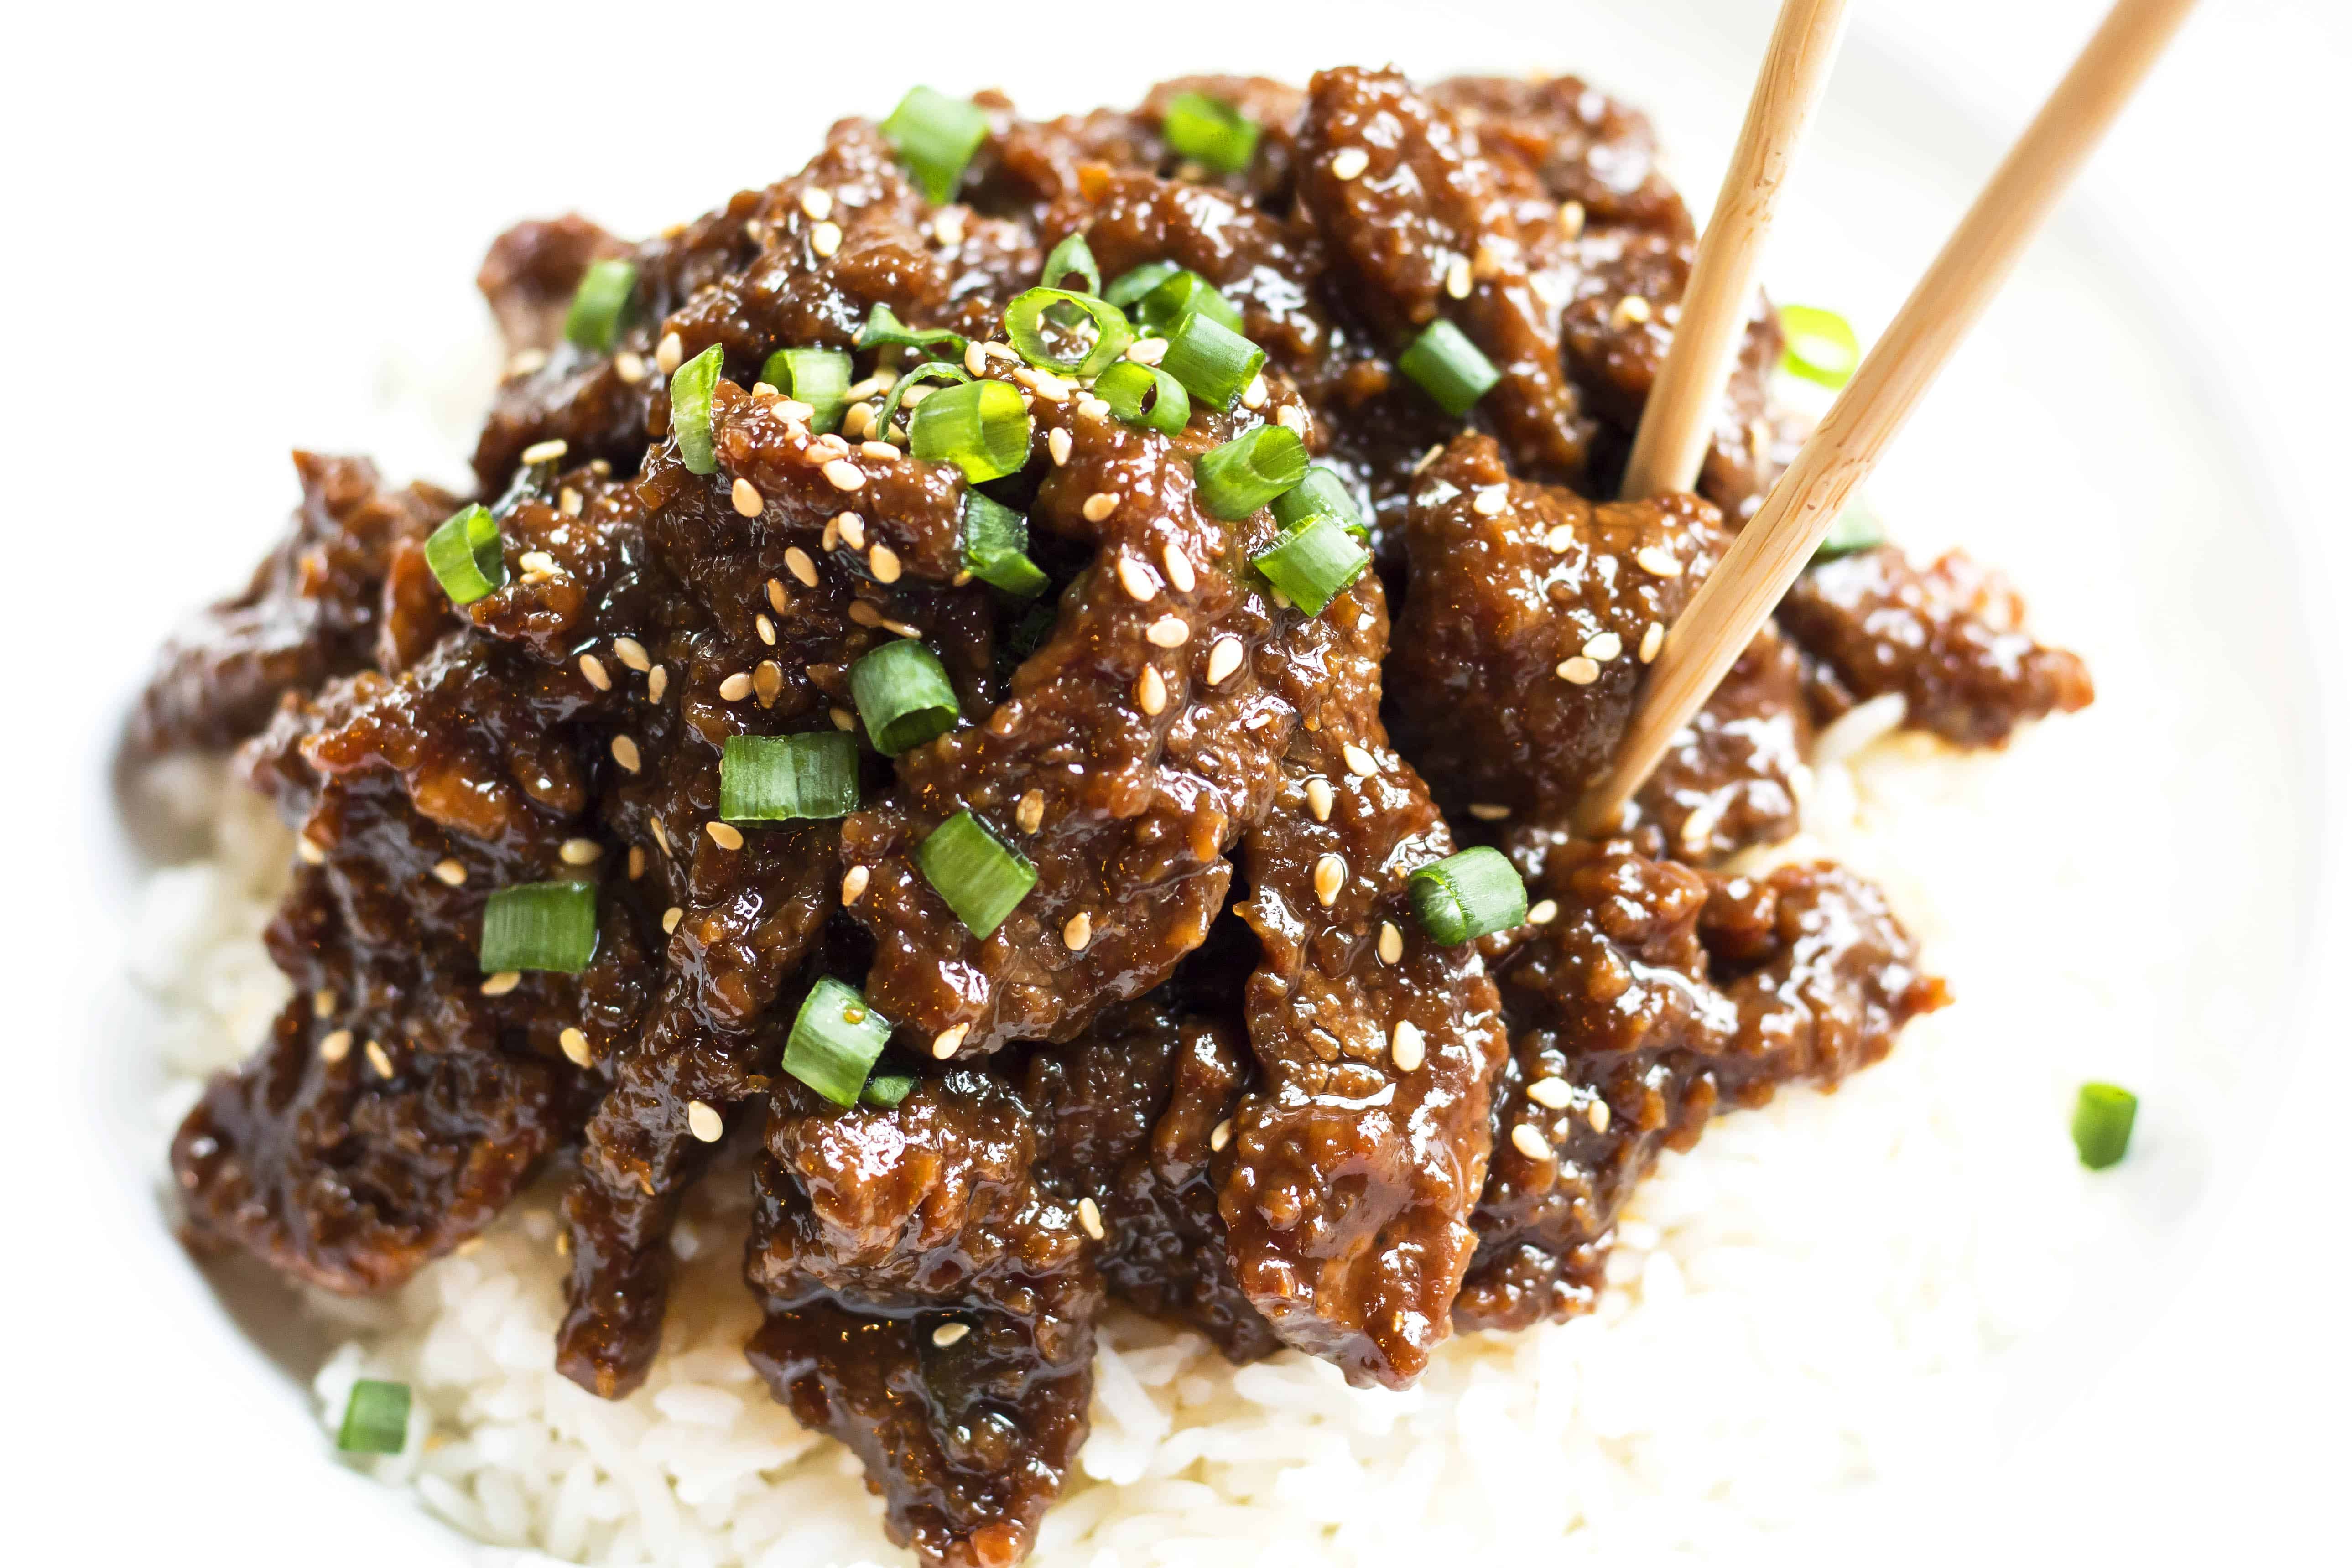 A close up picture of chopsticks picking up a piece of Copycat Mongolian Beef for dinner.